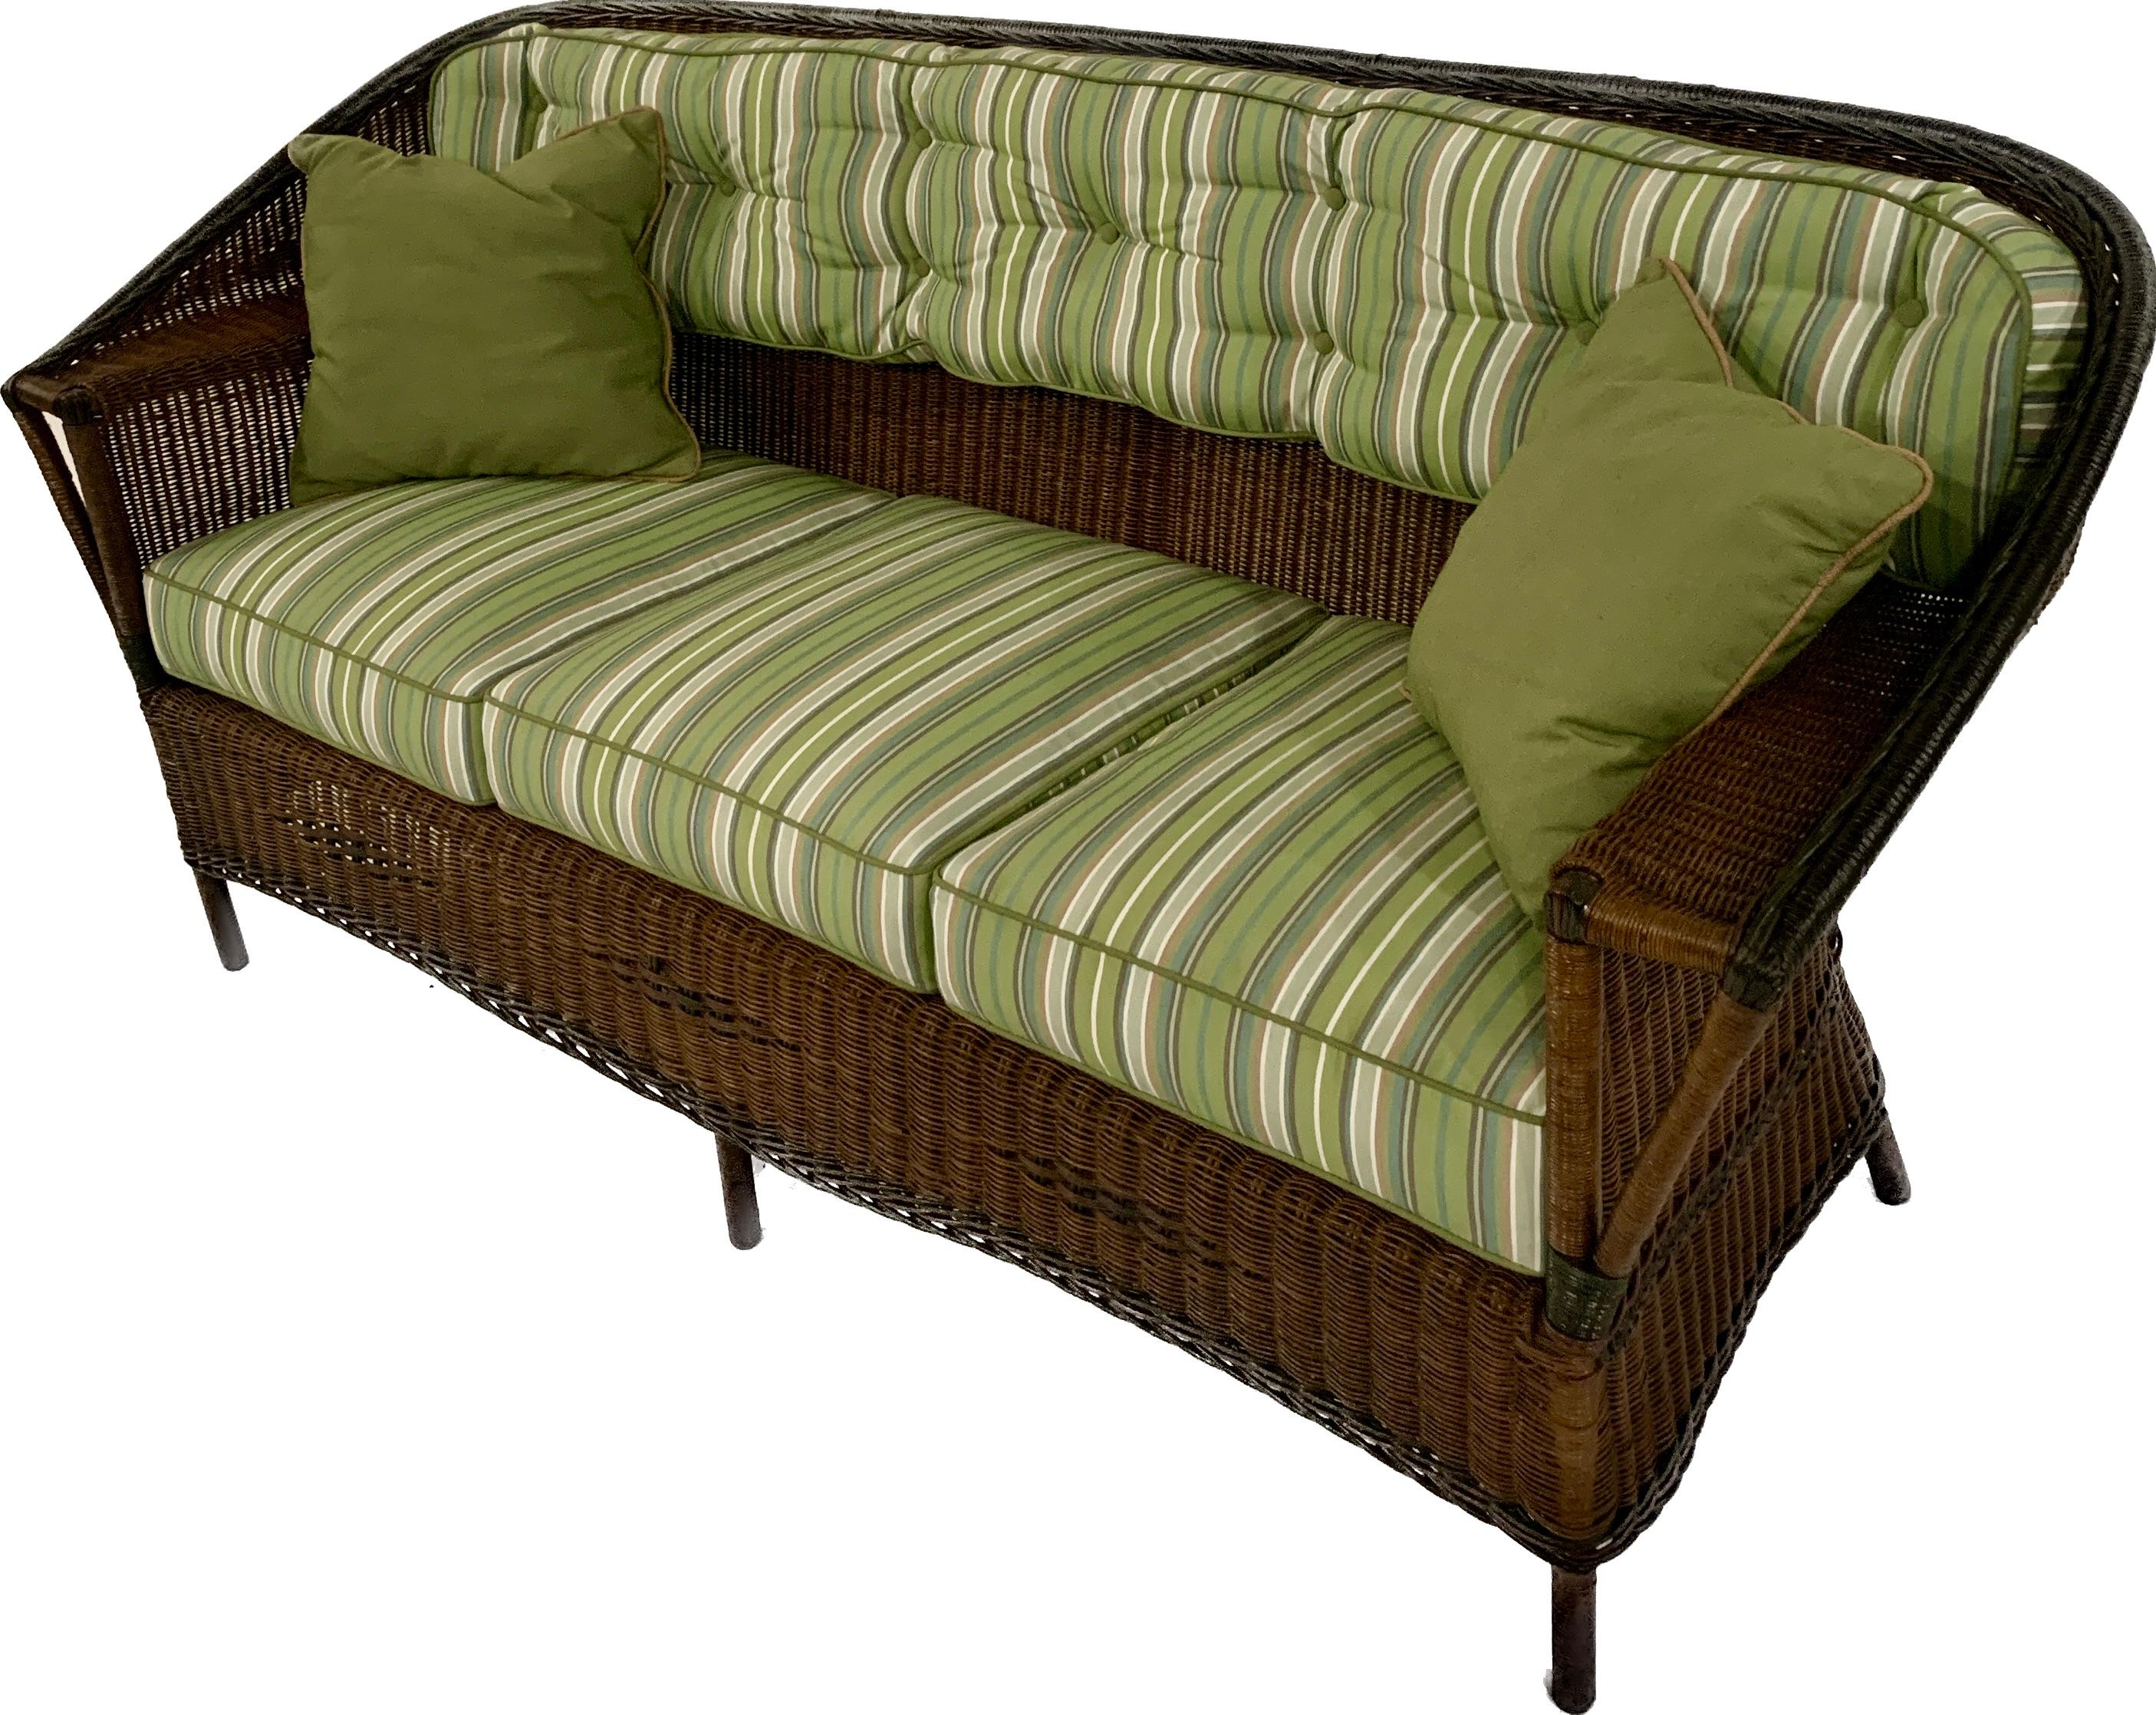 A beautiful matching three piece Antique Wicker Suite in natural finish with colored trims in sienna, green and black, American,C. 1920.
This closely woven suite is magnificent in its design! Each piece in the set is closely woven in natural